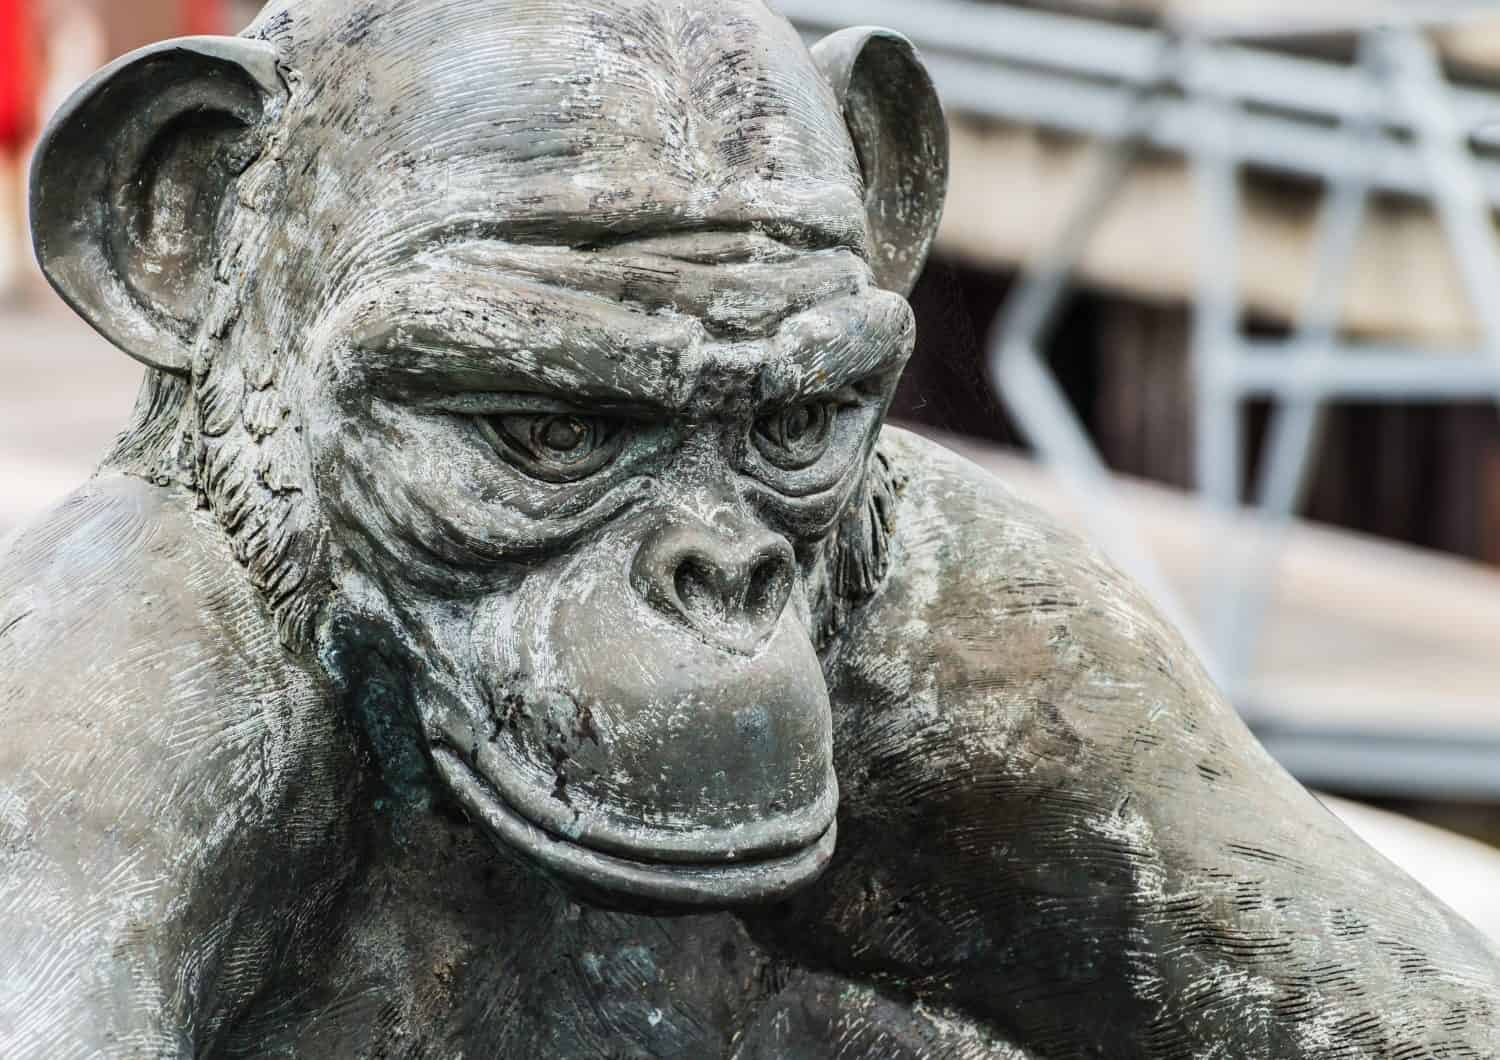 A shot of a wishing well, sculpted as a monkey, at Hartlepool marina, UK.